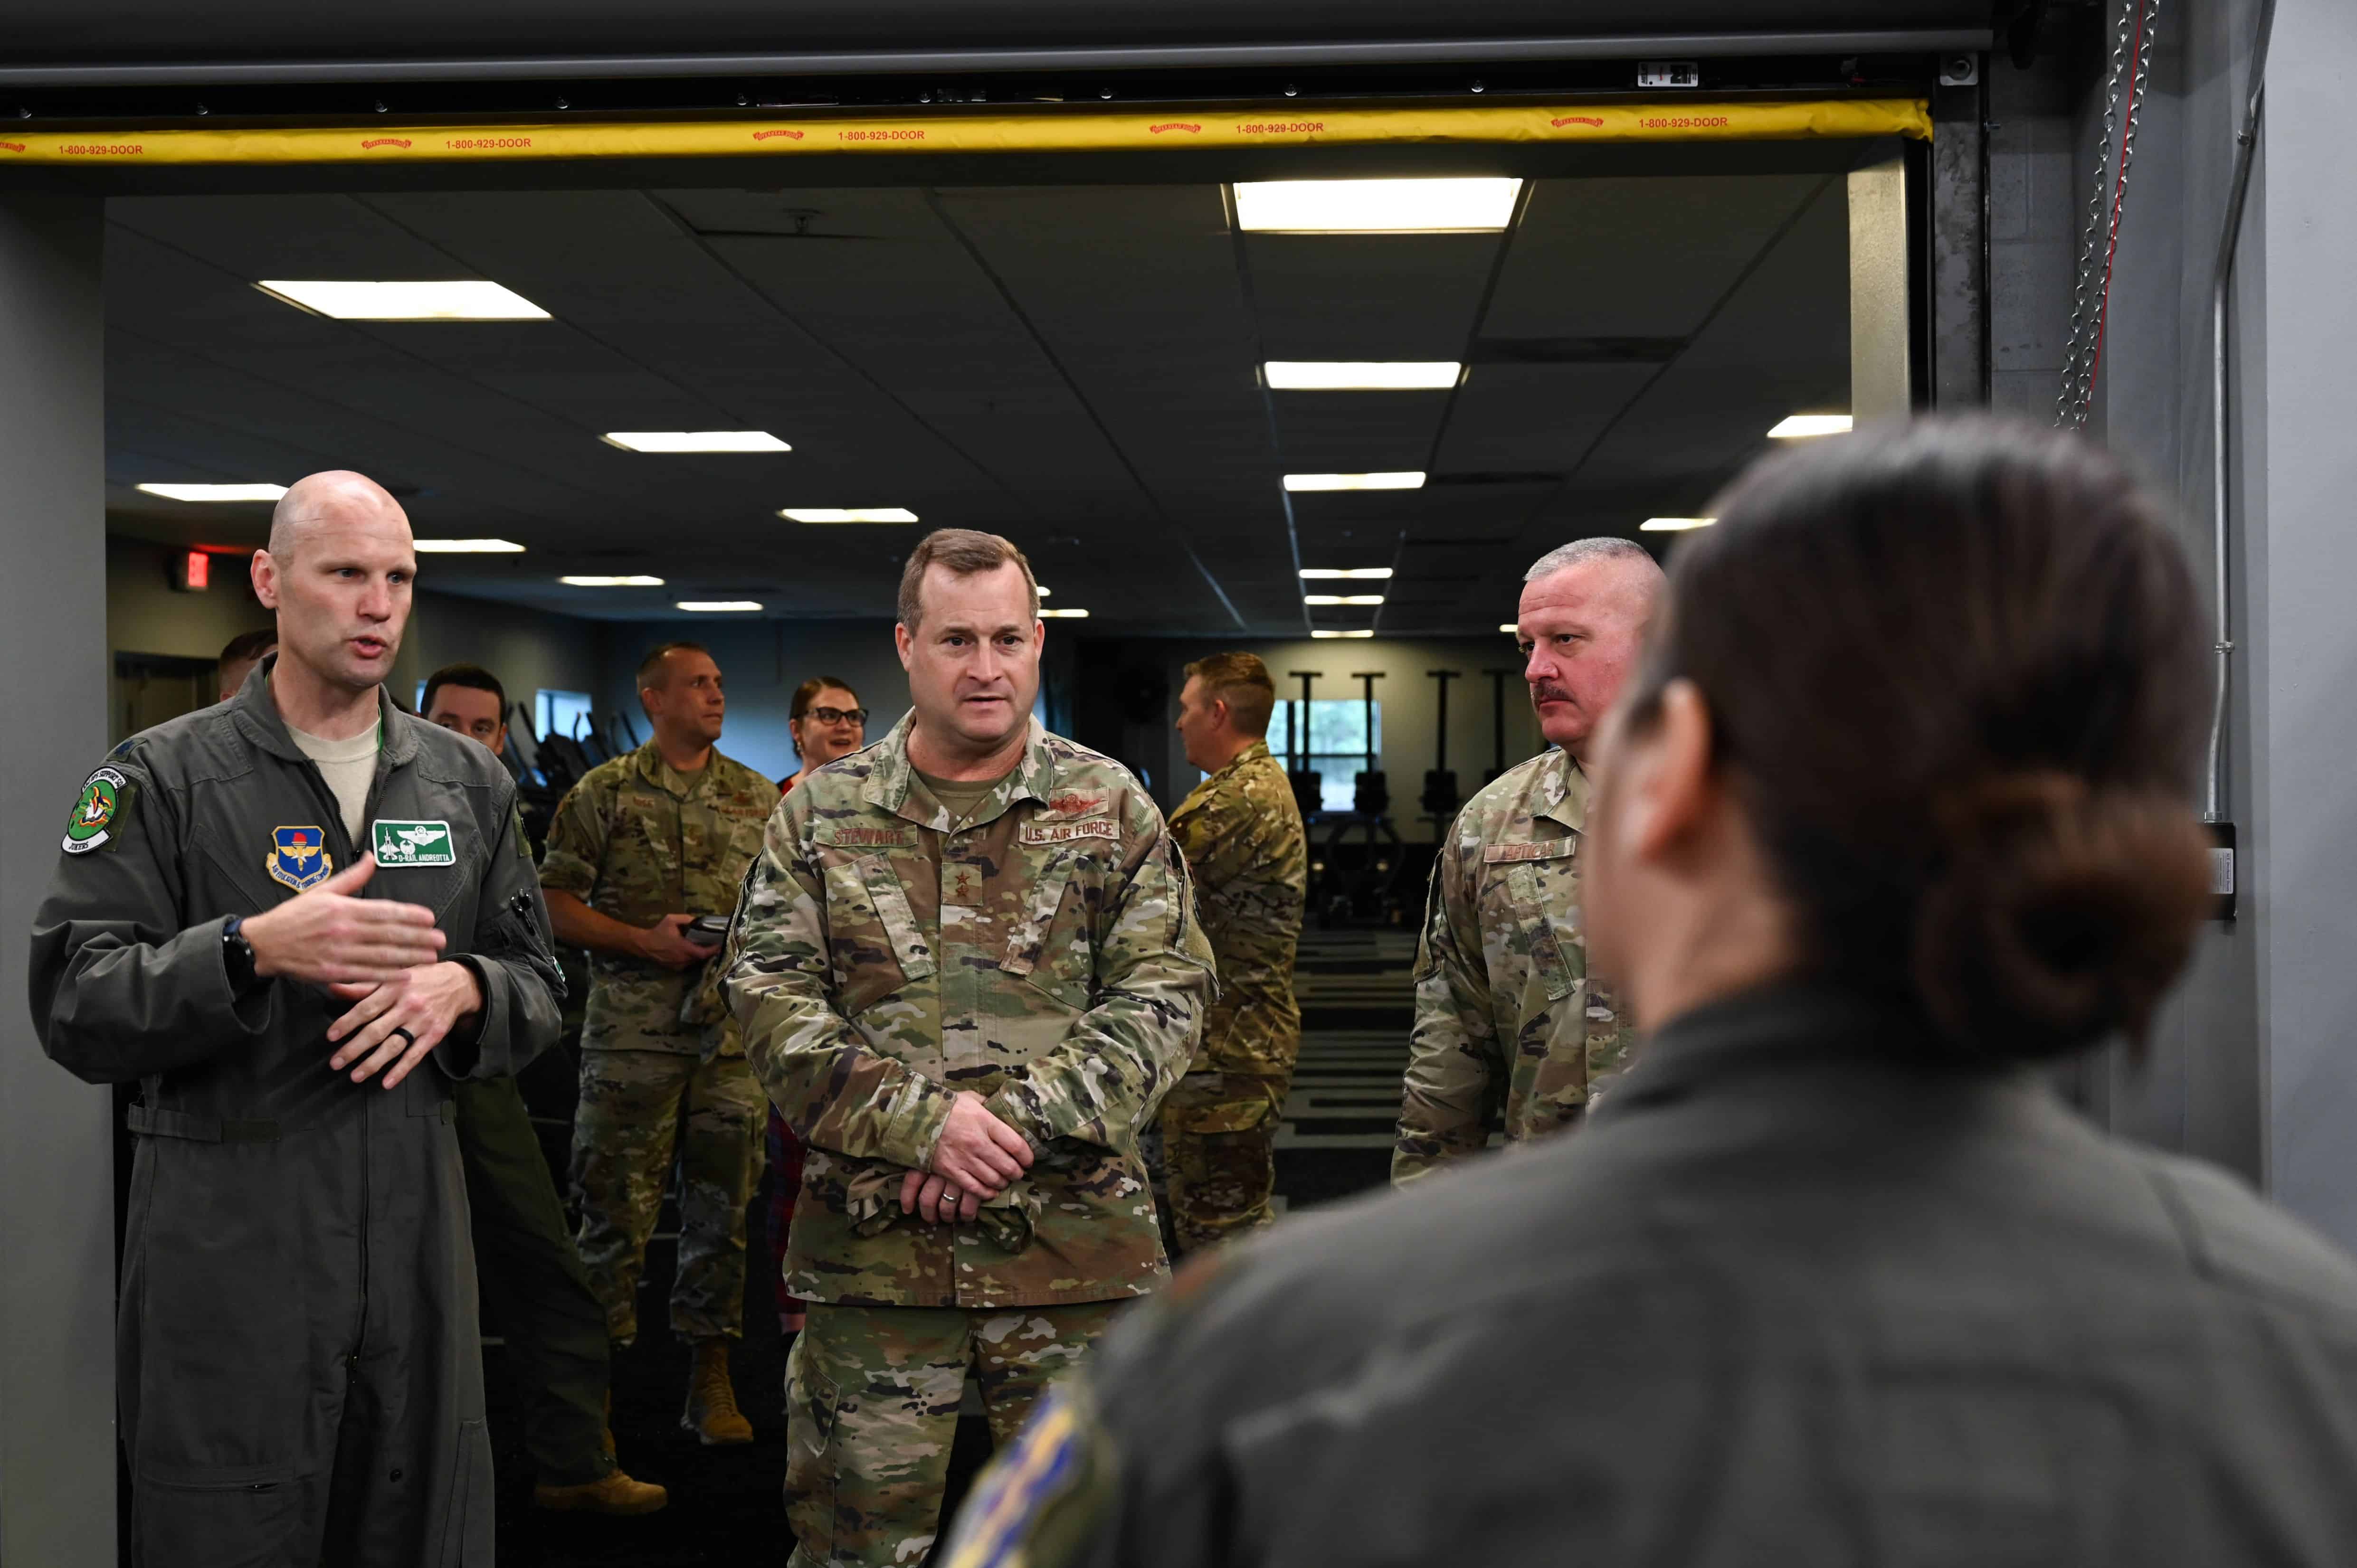 Maj. Gen. Phillip Stewart, commander of 19th Air Force, Joint Base San Antonio-Randolph, Texas, is briefed by U.S. Air Force Maj. Stephanie Chayrez, flight commander, human performance, 33rd Fighter Wing, at Eglin Air Force Base, Florida, Nov. 30, 2022. Stewart toured the 33rd FW to learn about the wing’s mission and commemorate exceptional Airmen. (U.S. Air Force photo by Airman Christian Corley)